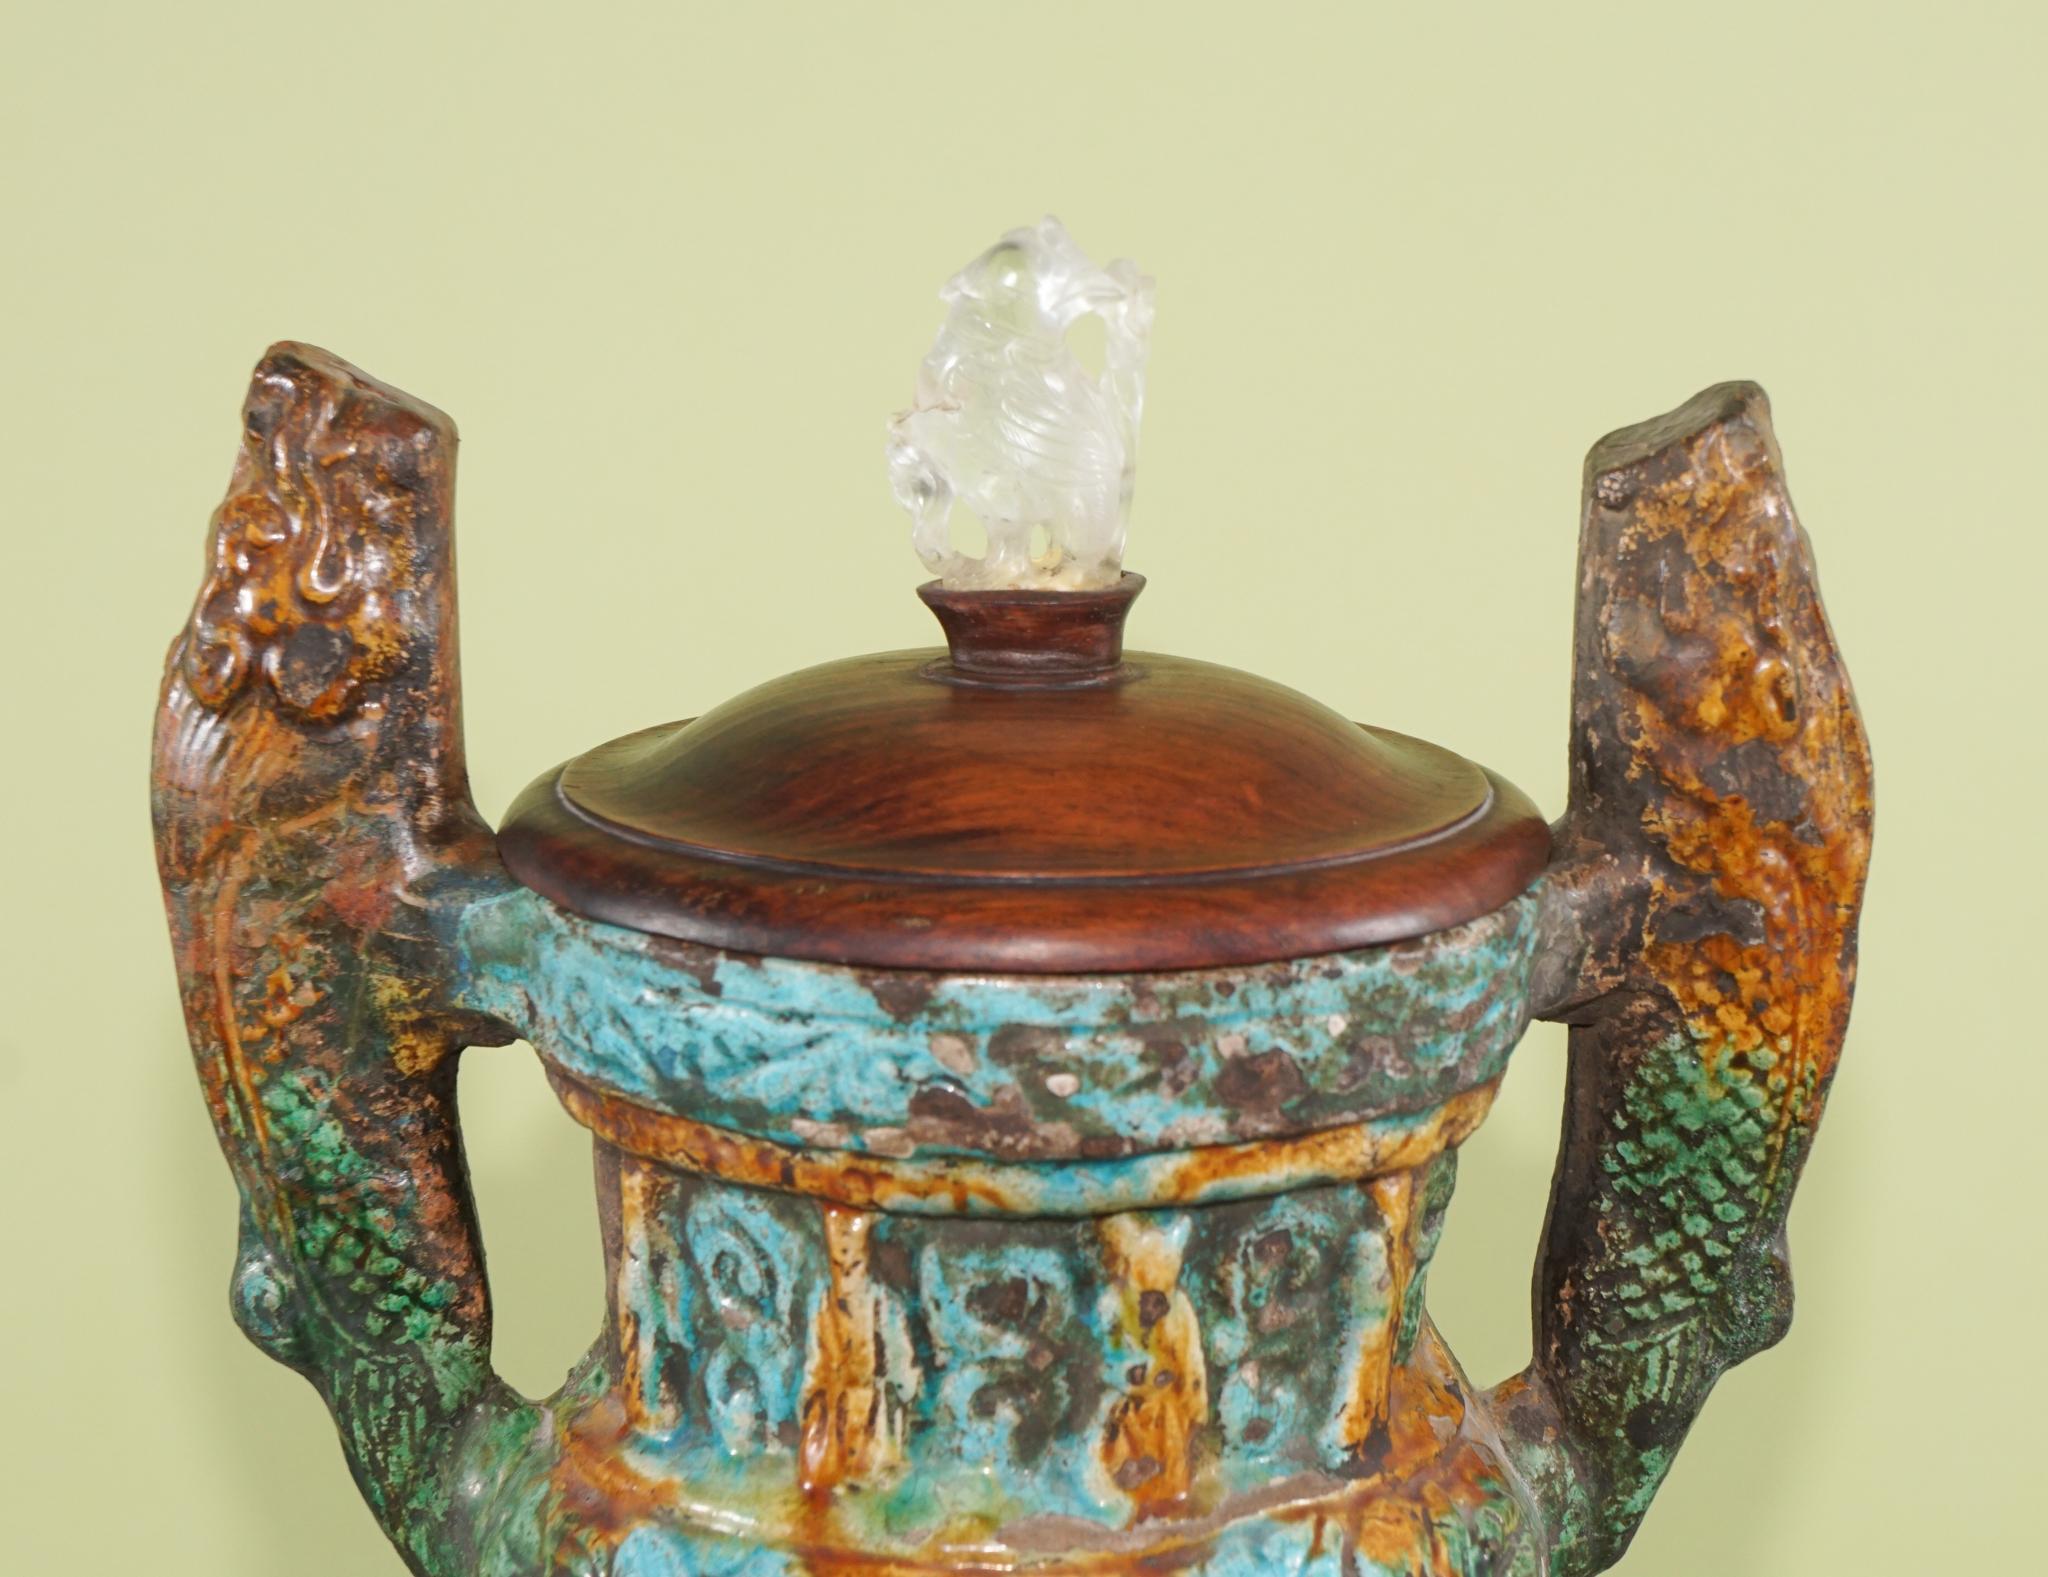 The Ming period or Great Ming Period is the last Han ruled dynasty in Chinese history. Considers a high mark culturally and influenced by great events at home and wider contact with outside influences the Ming excelled in porcelain and pottery